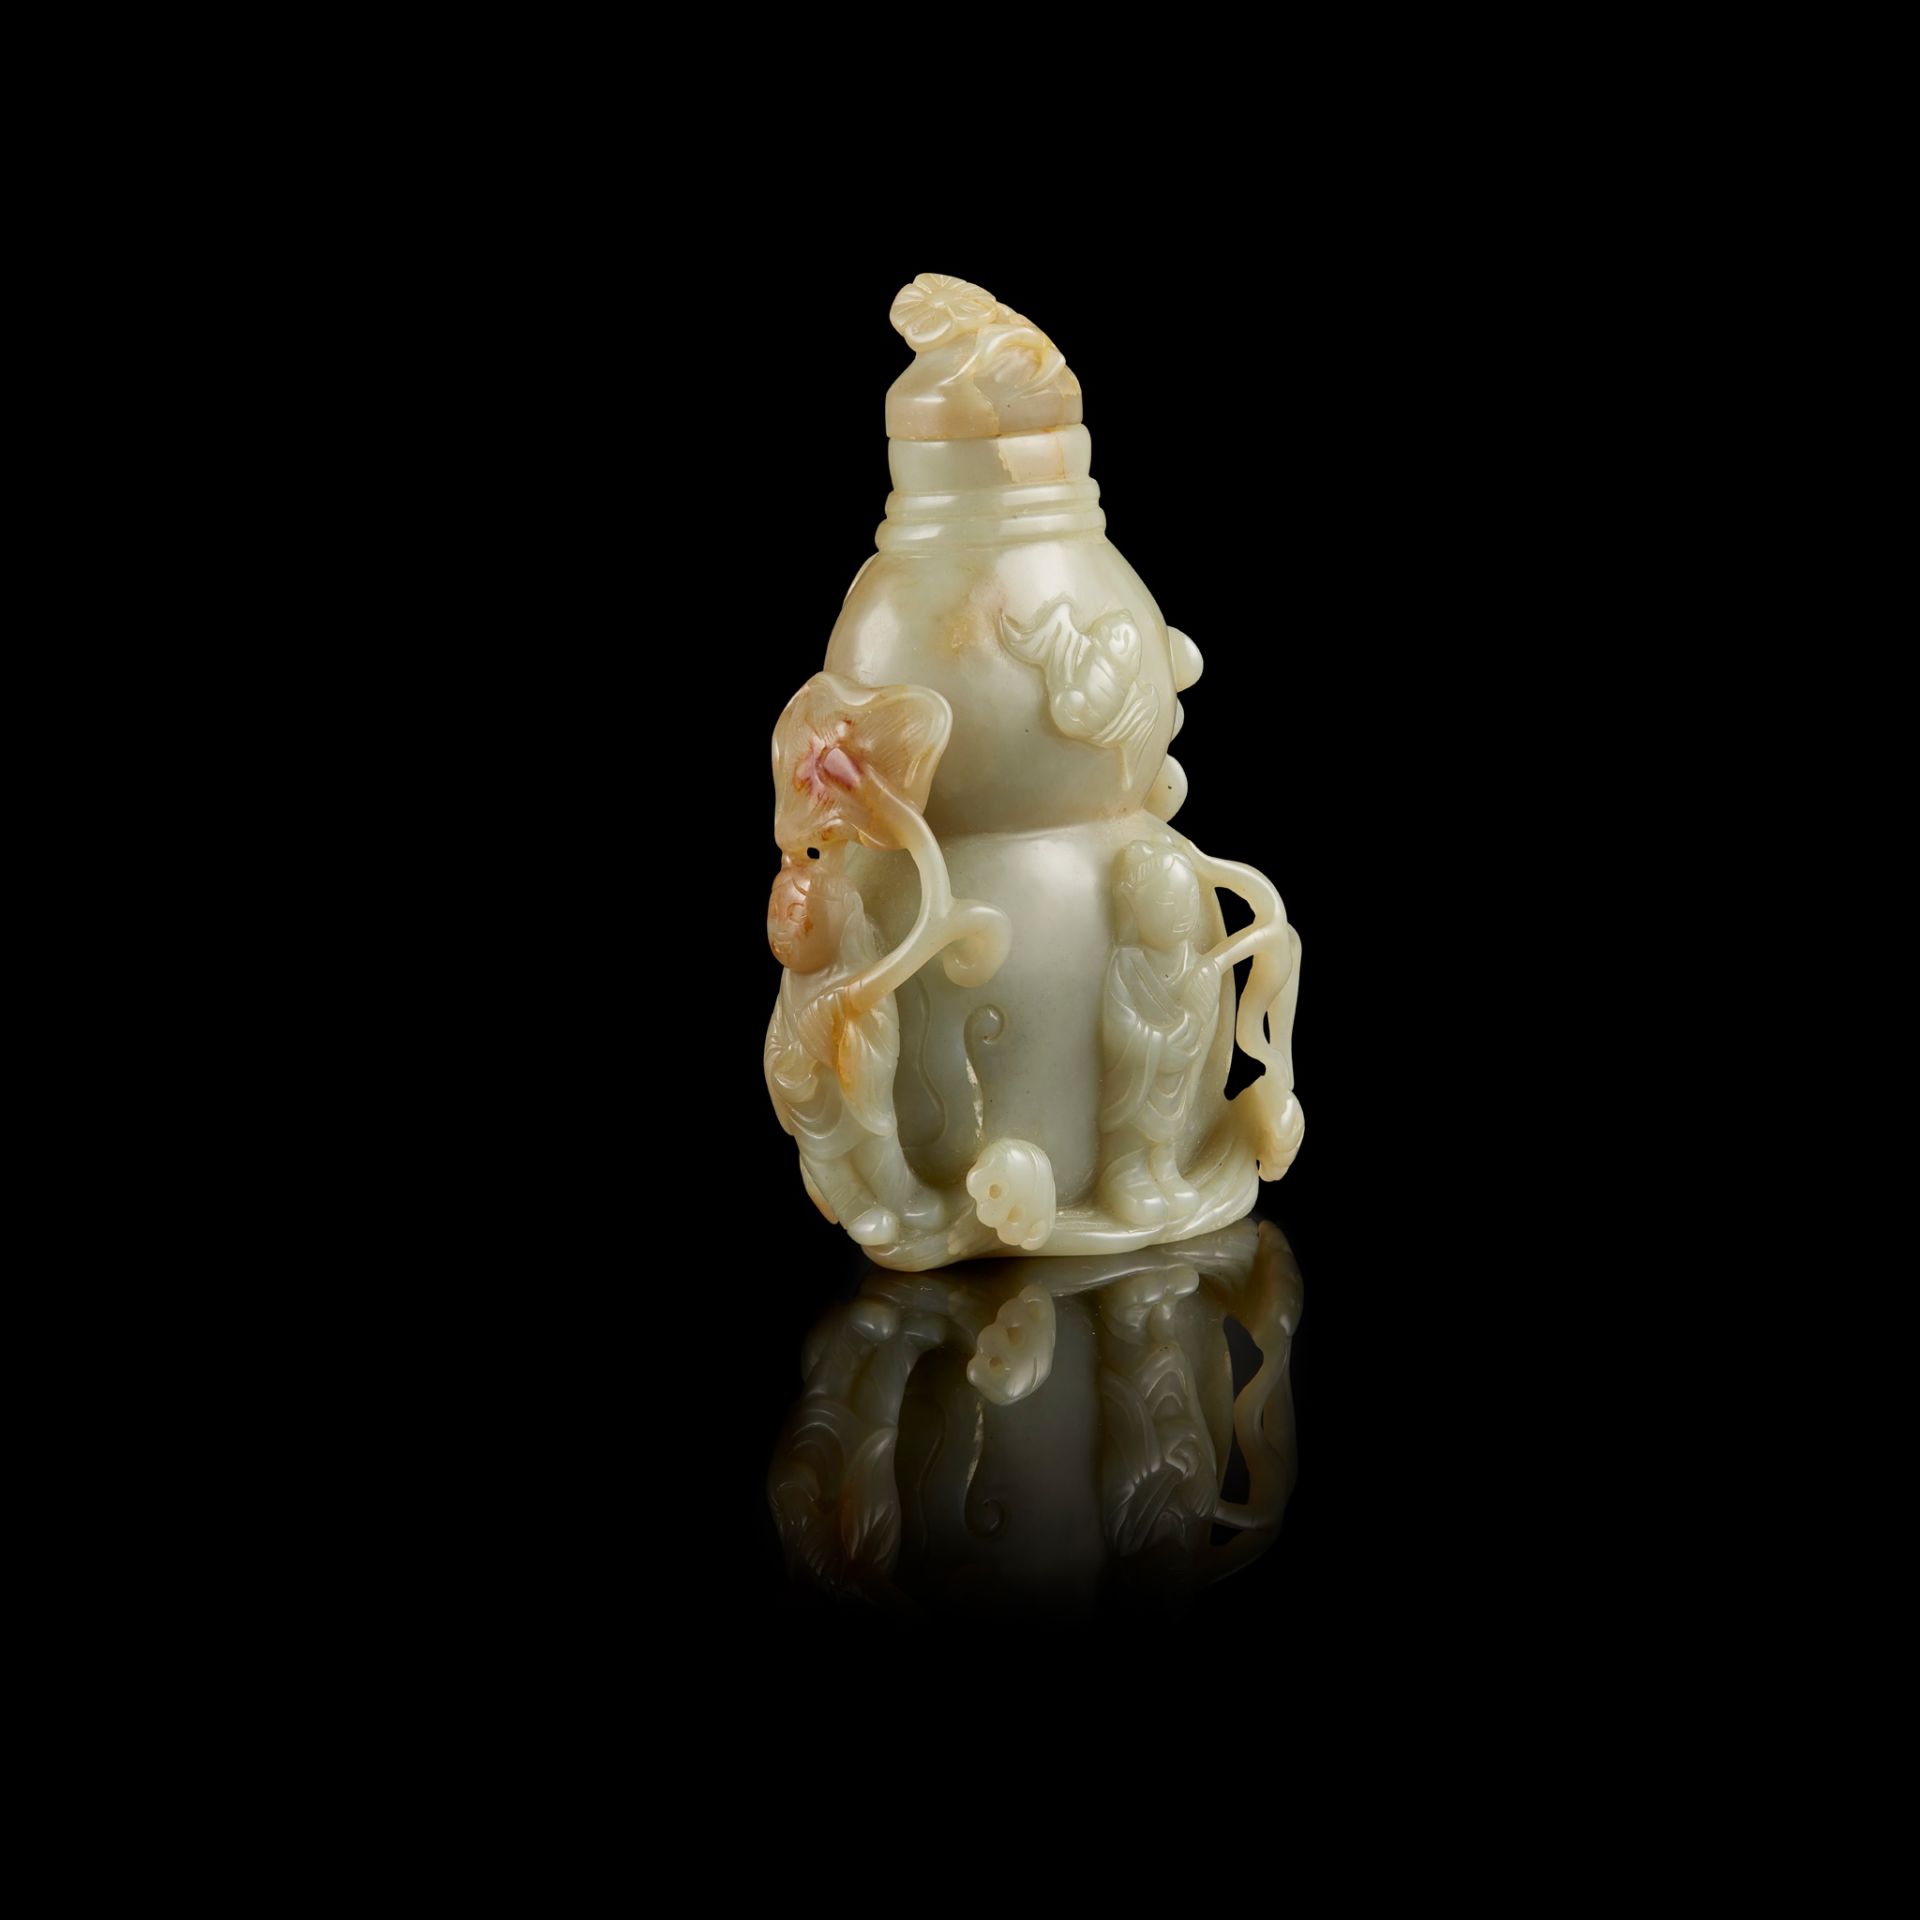 CELADON JADE CARVING OF 'DOUBLE-GOURD' LIDDED VASE 19TH-20TH CENTURY - Image 2 of 2